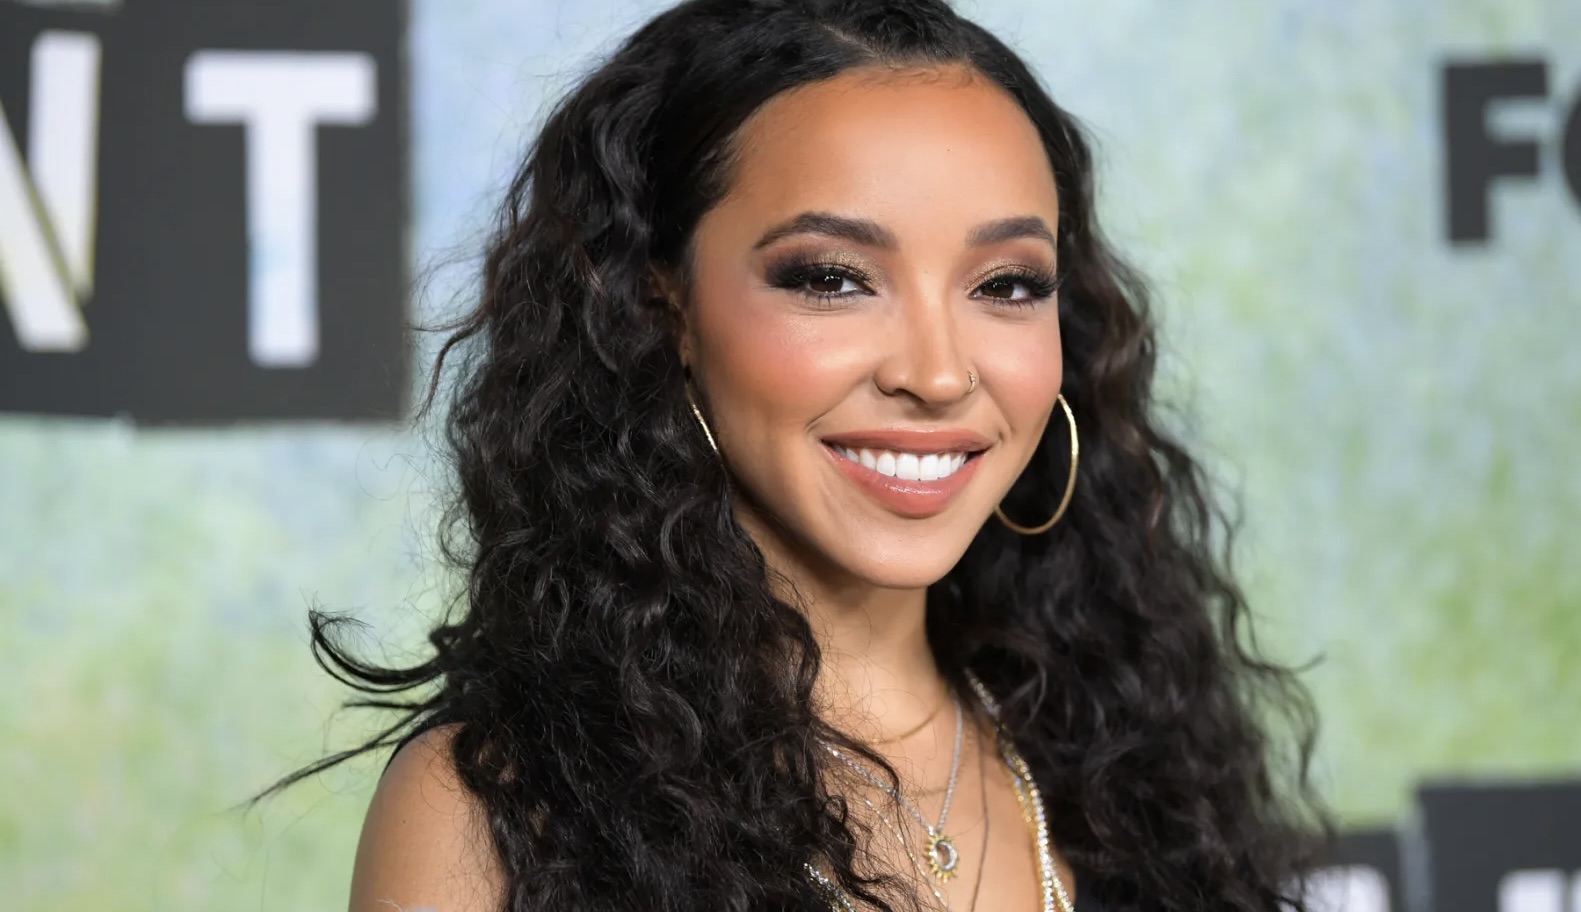 tinashe-granted-3-year-restraining-order-against-man-who-showed-up-at-her-home